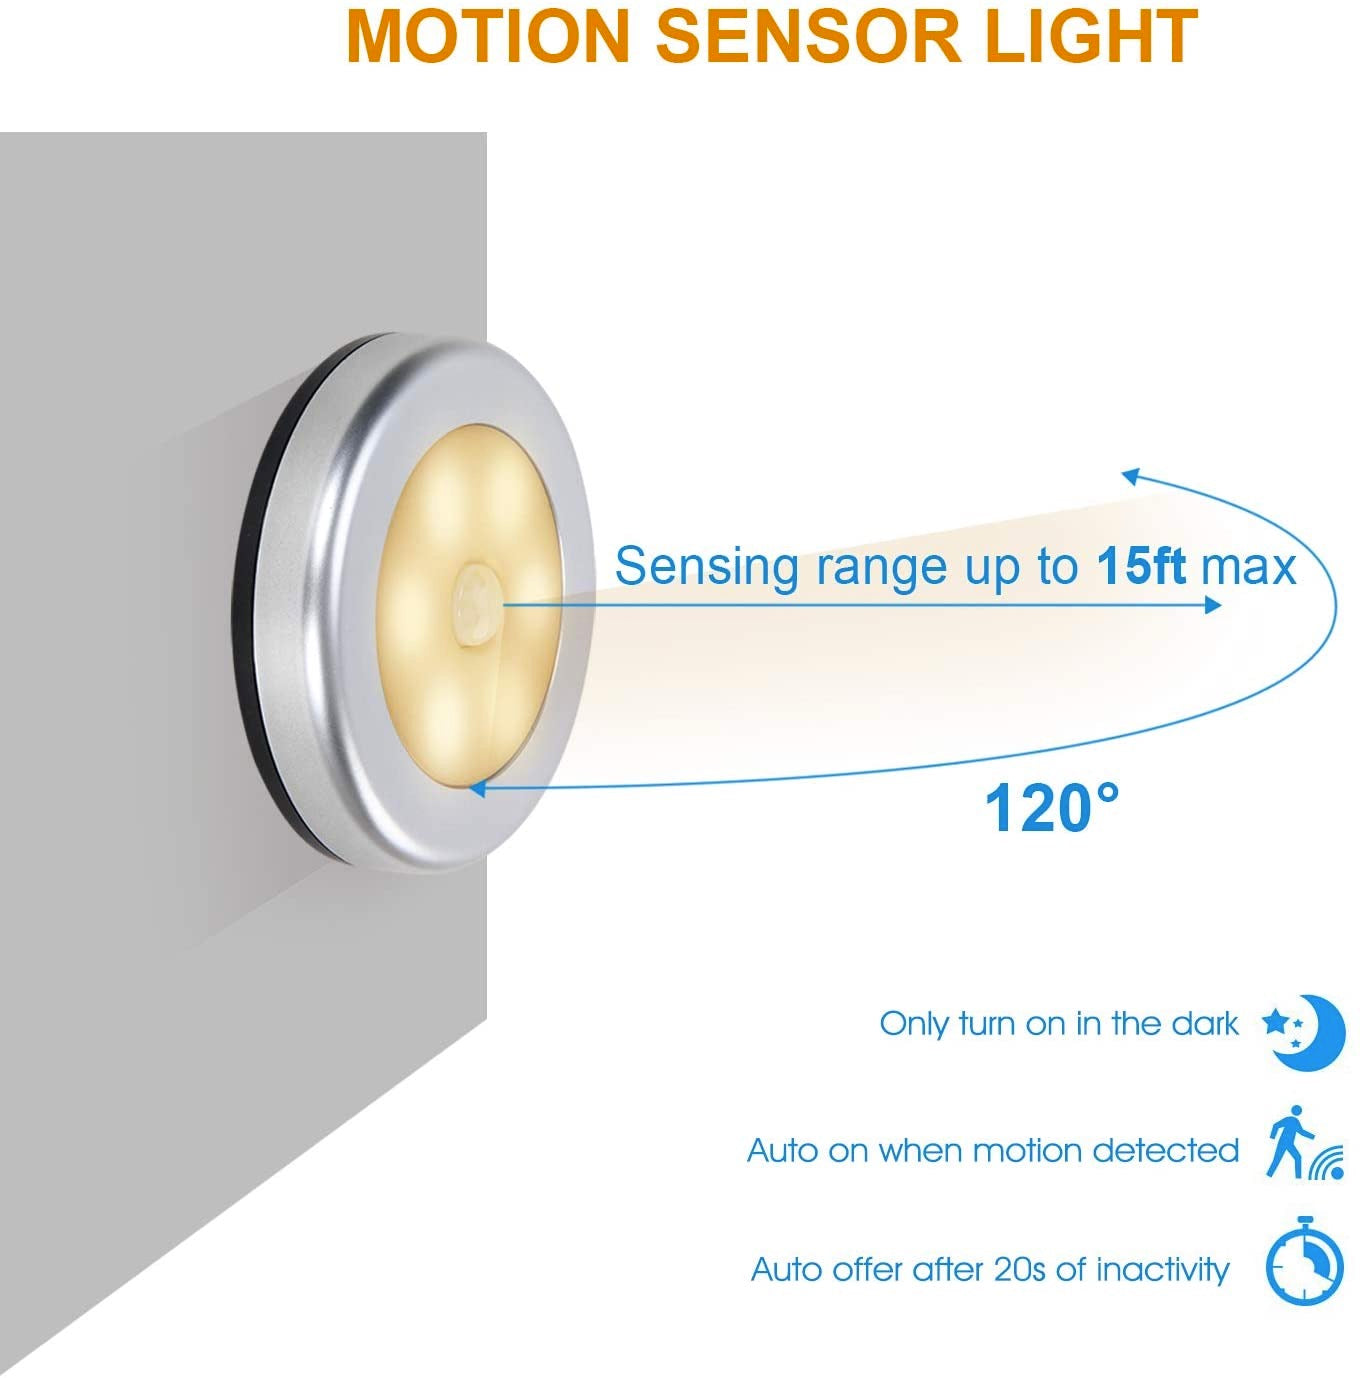 6 battery operated motion sensor night lights with sensing range up to 15ft max and spans 120 degree circumference. 